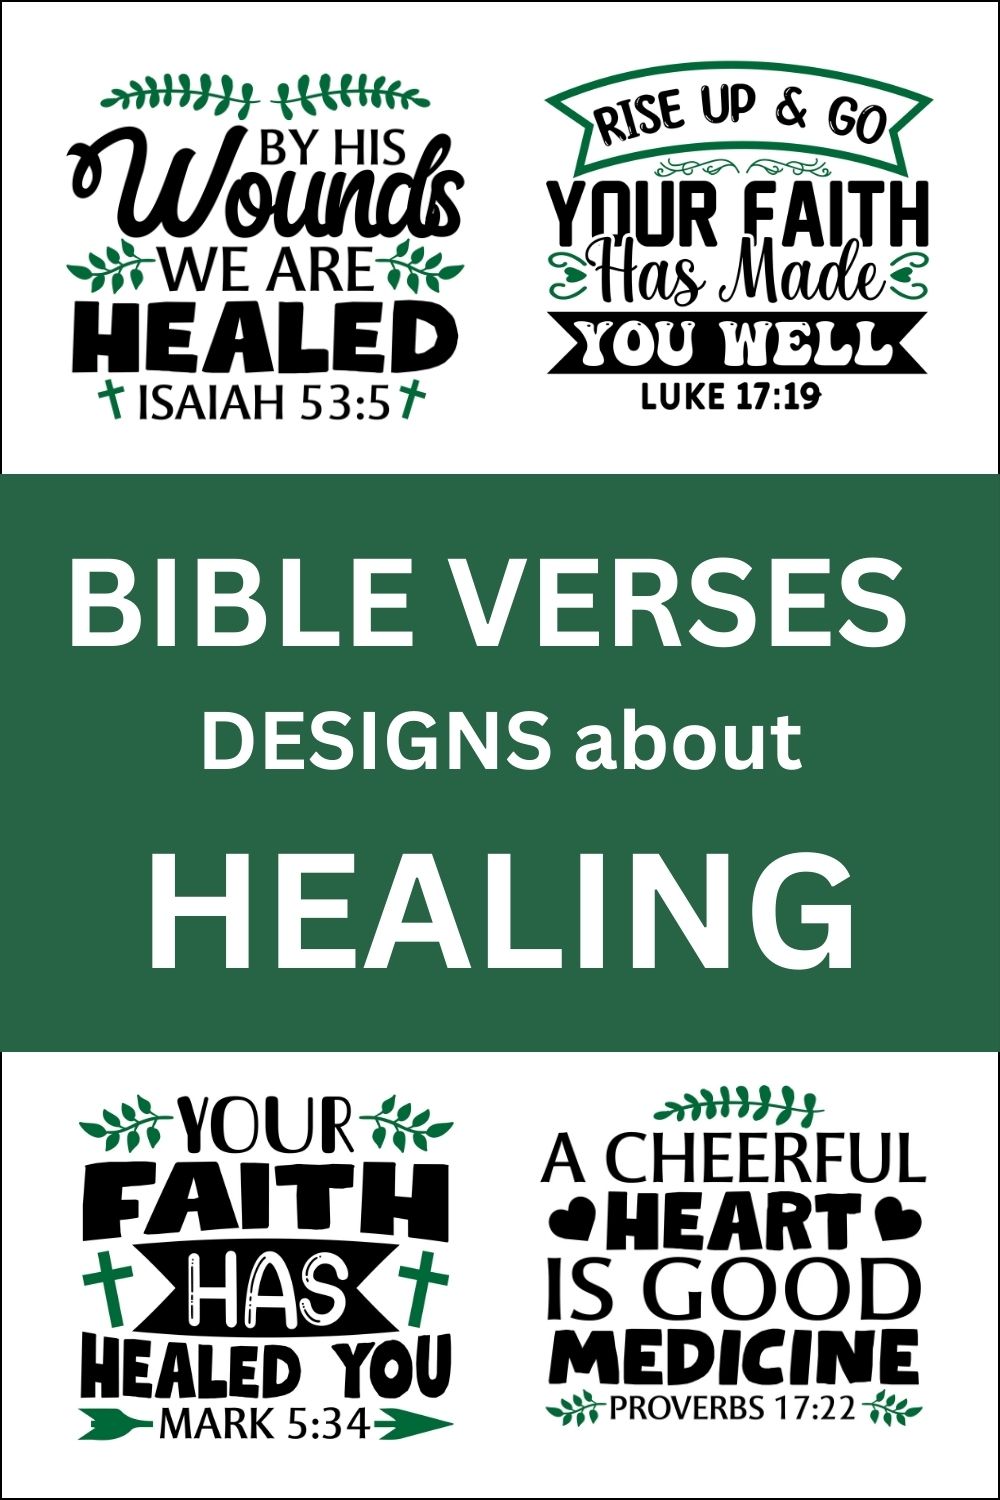 Free printable bundle of Bible Verses about healing, scripture passages, Cricut designs, DIY patterns, svg files, templates, clip art, stencils, silhouette, embroidery, cut files, design space, vector, crafts, laser cutting, and DIY crafts.